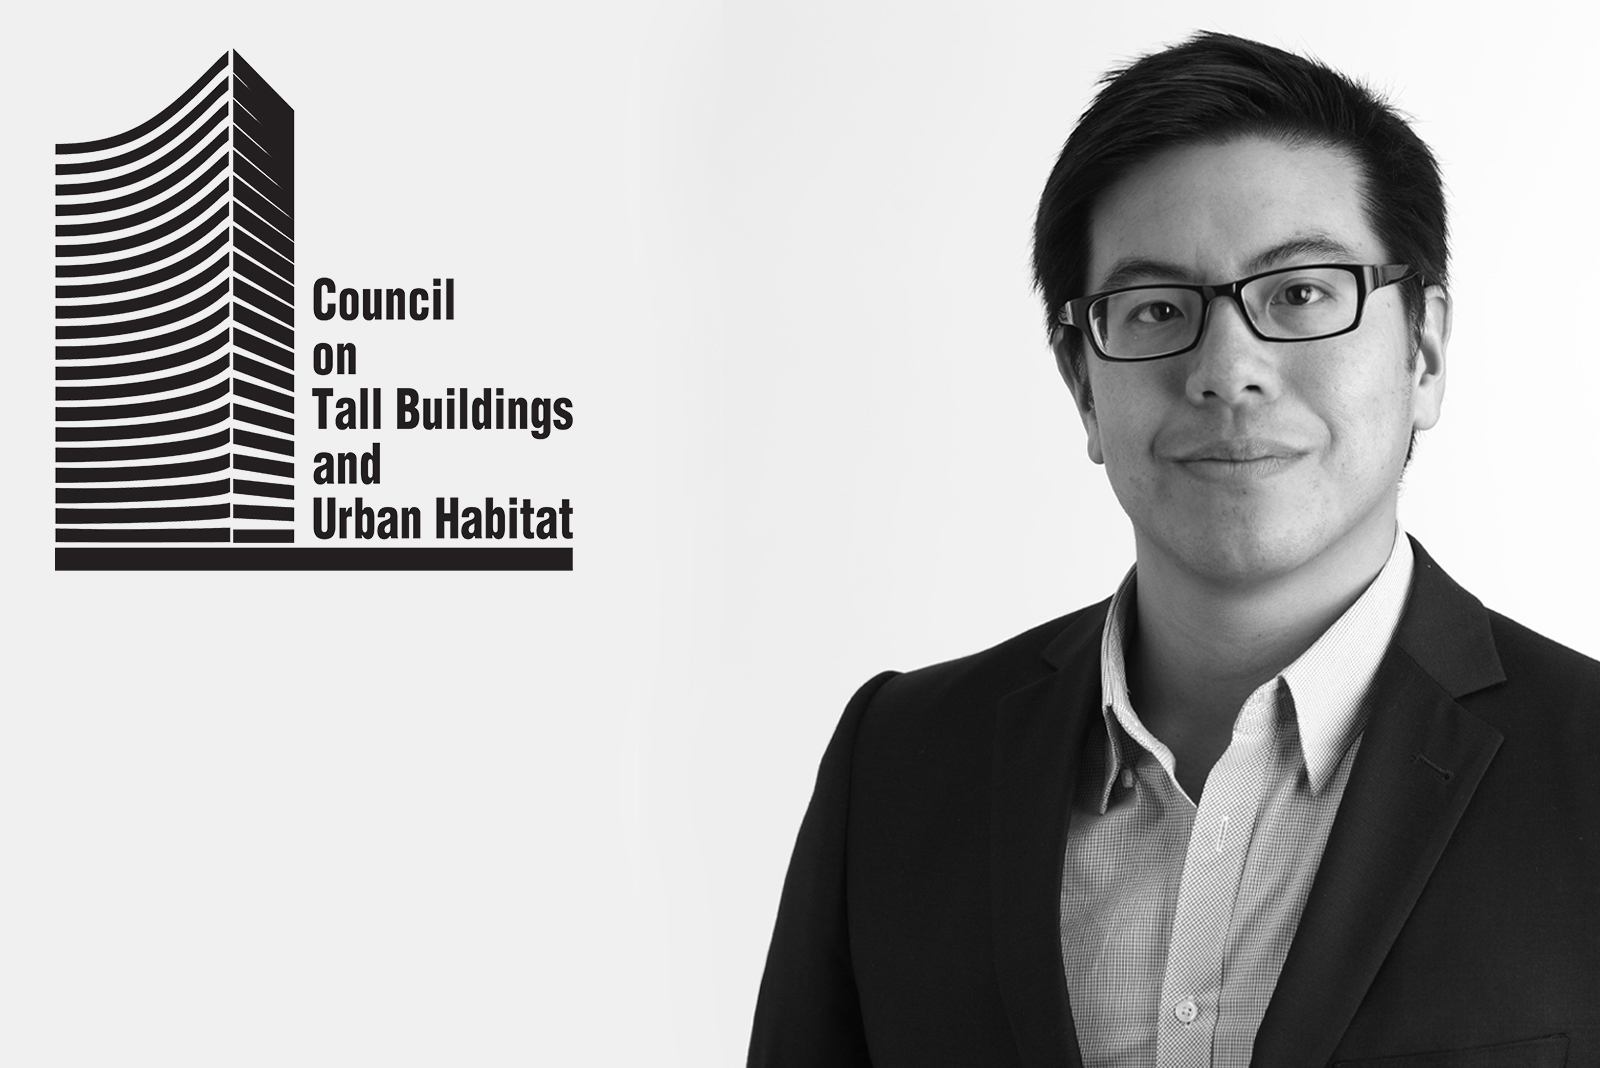 Ivan Ip presents at the Council on Tall Buildings and Urban Habitat conference